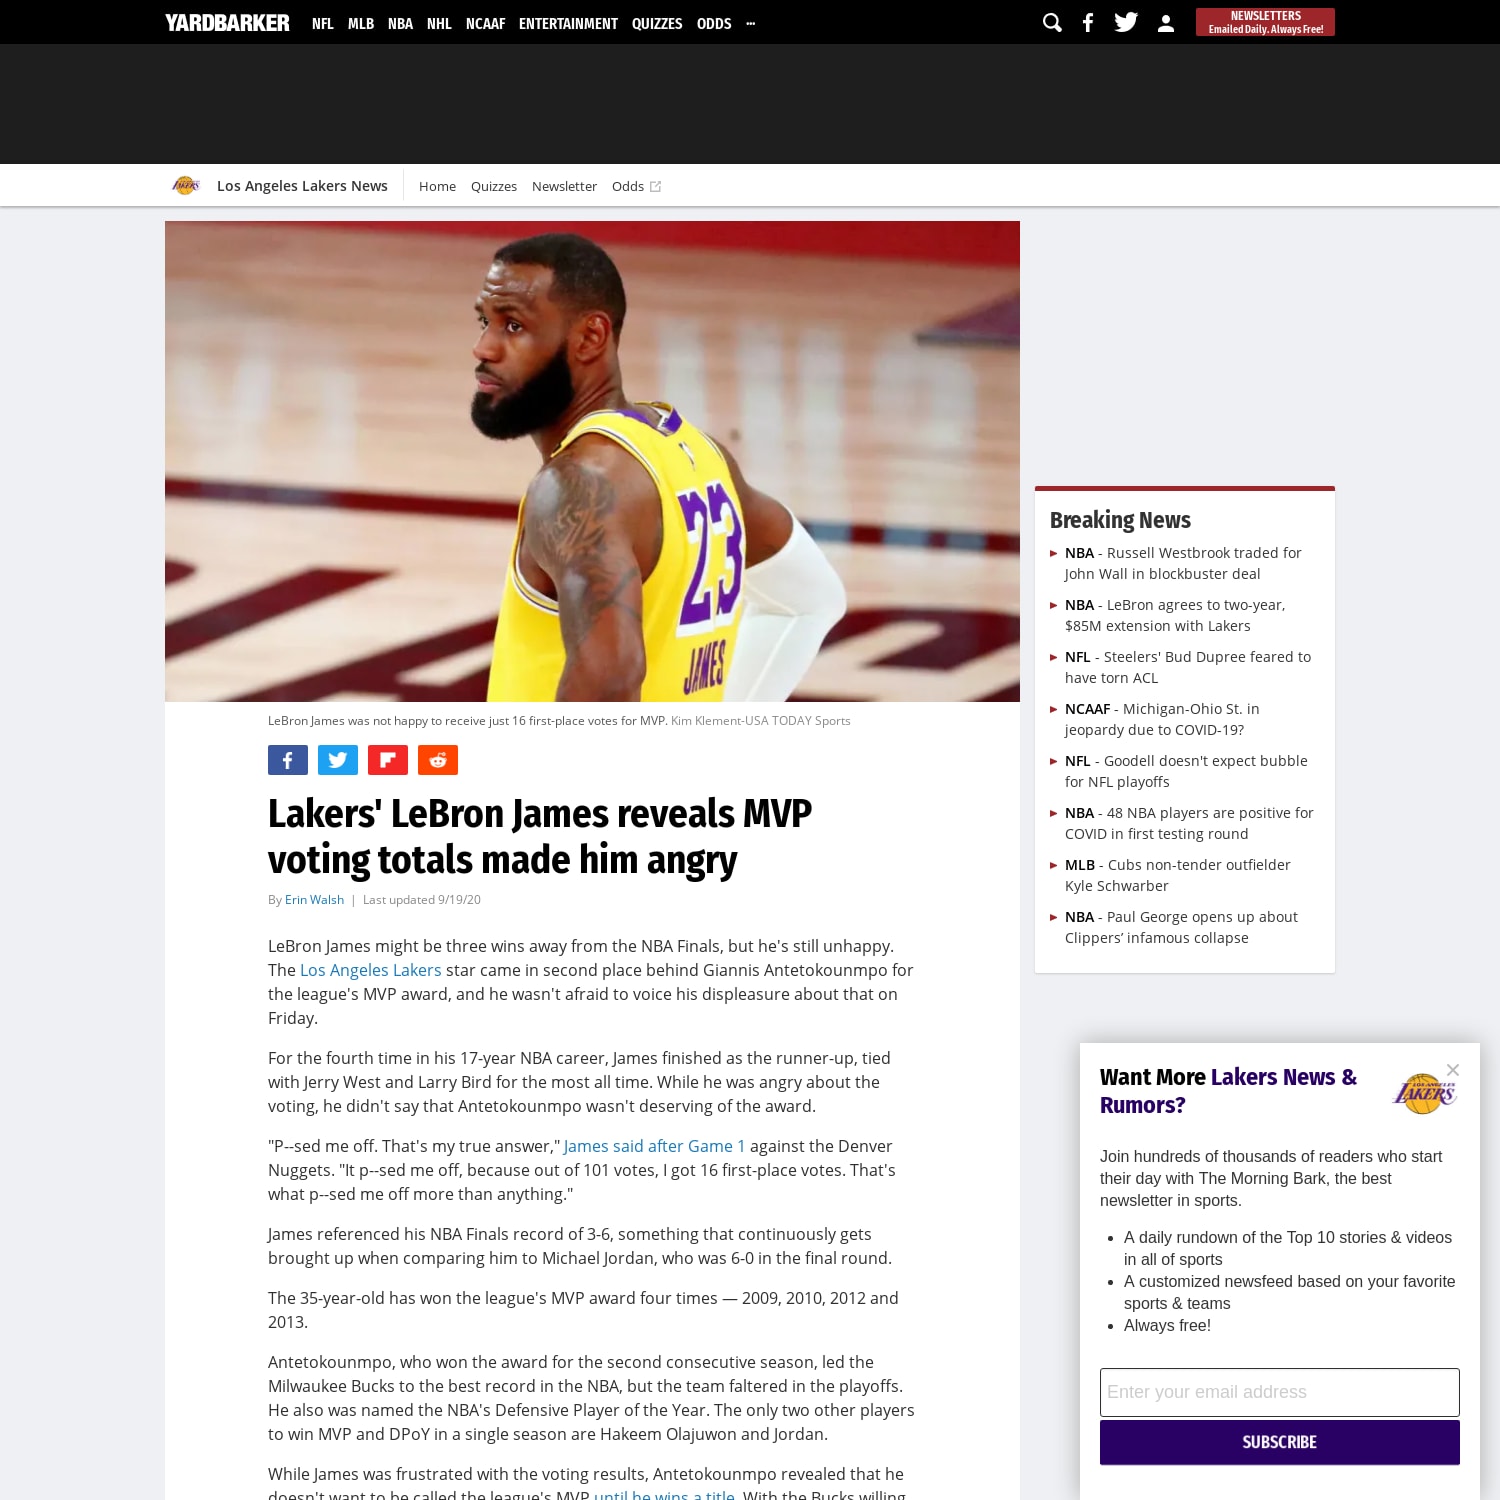 Lakers' LeBron James reveals MVP voting totals made him angry